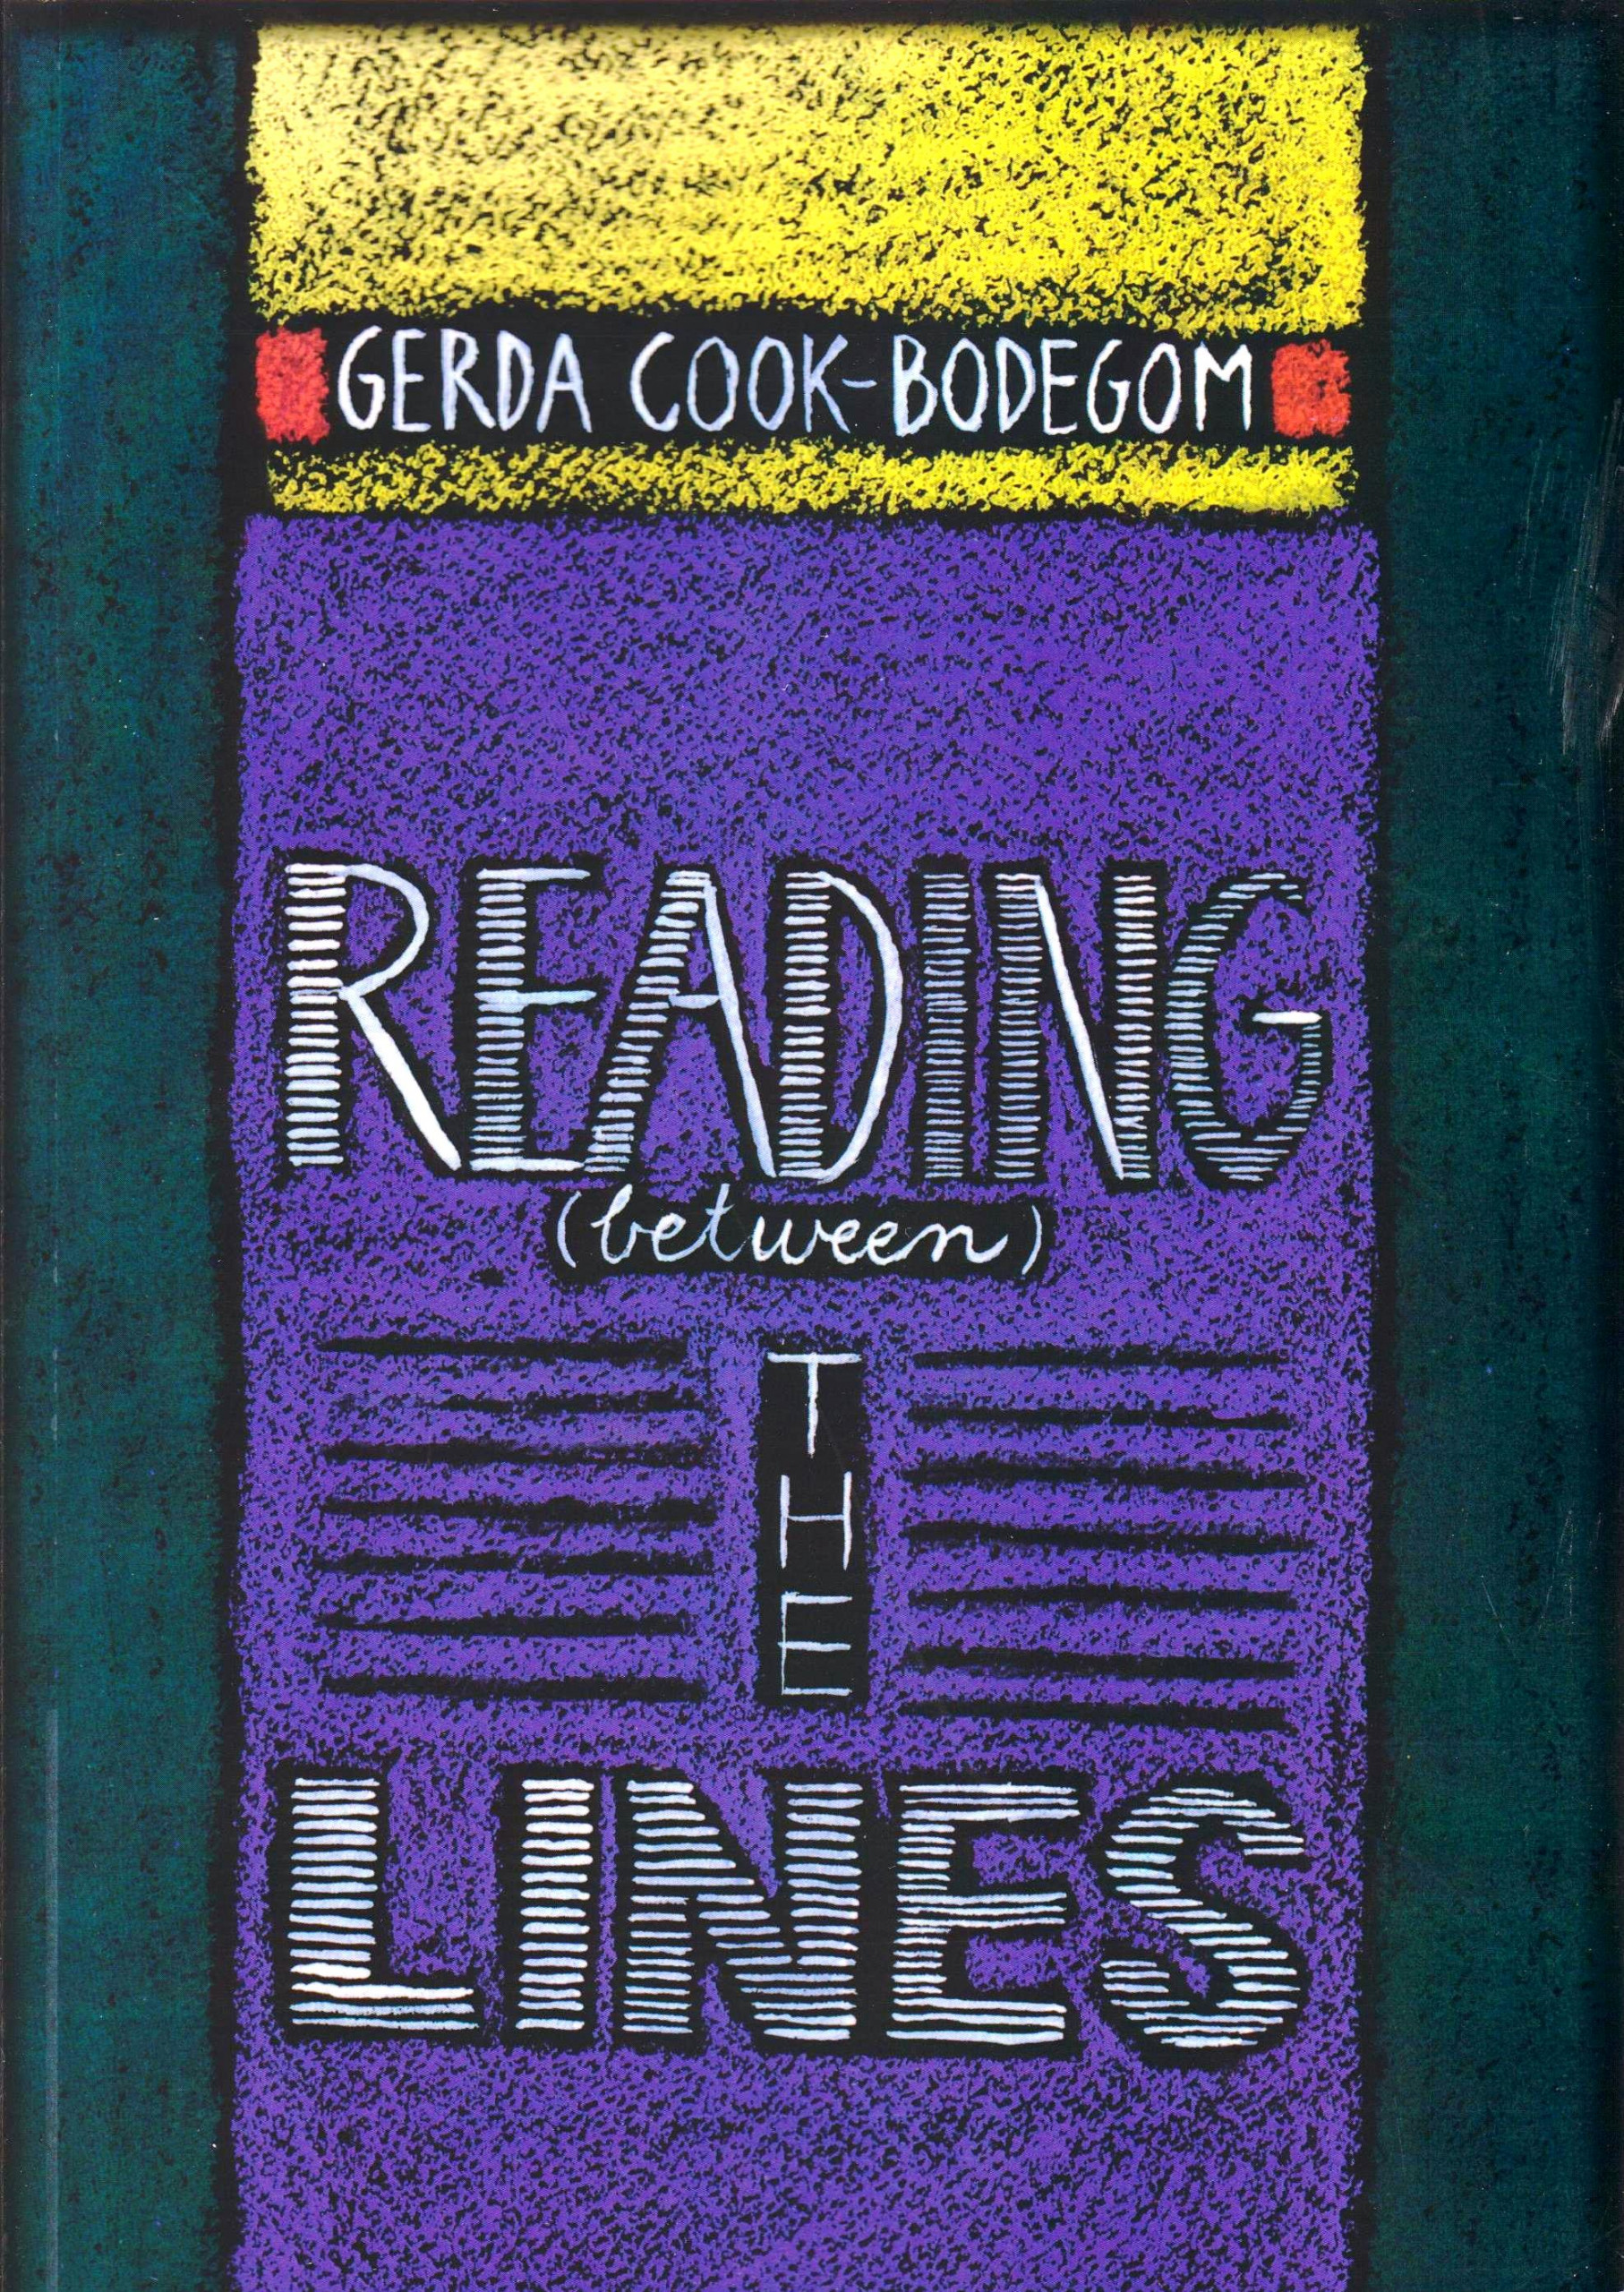 Reading (between) the lines